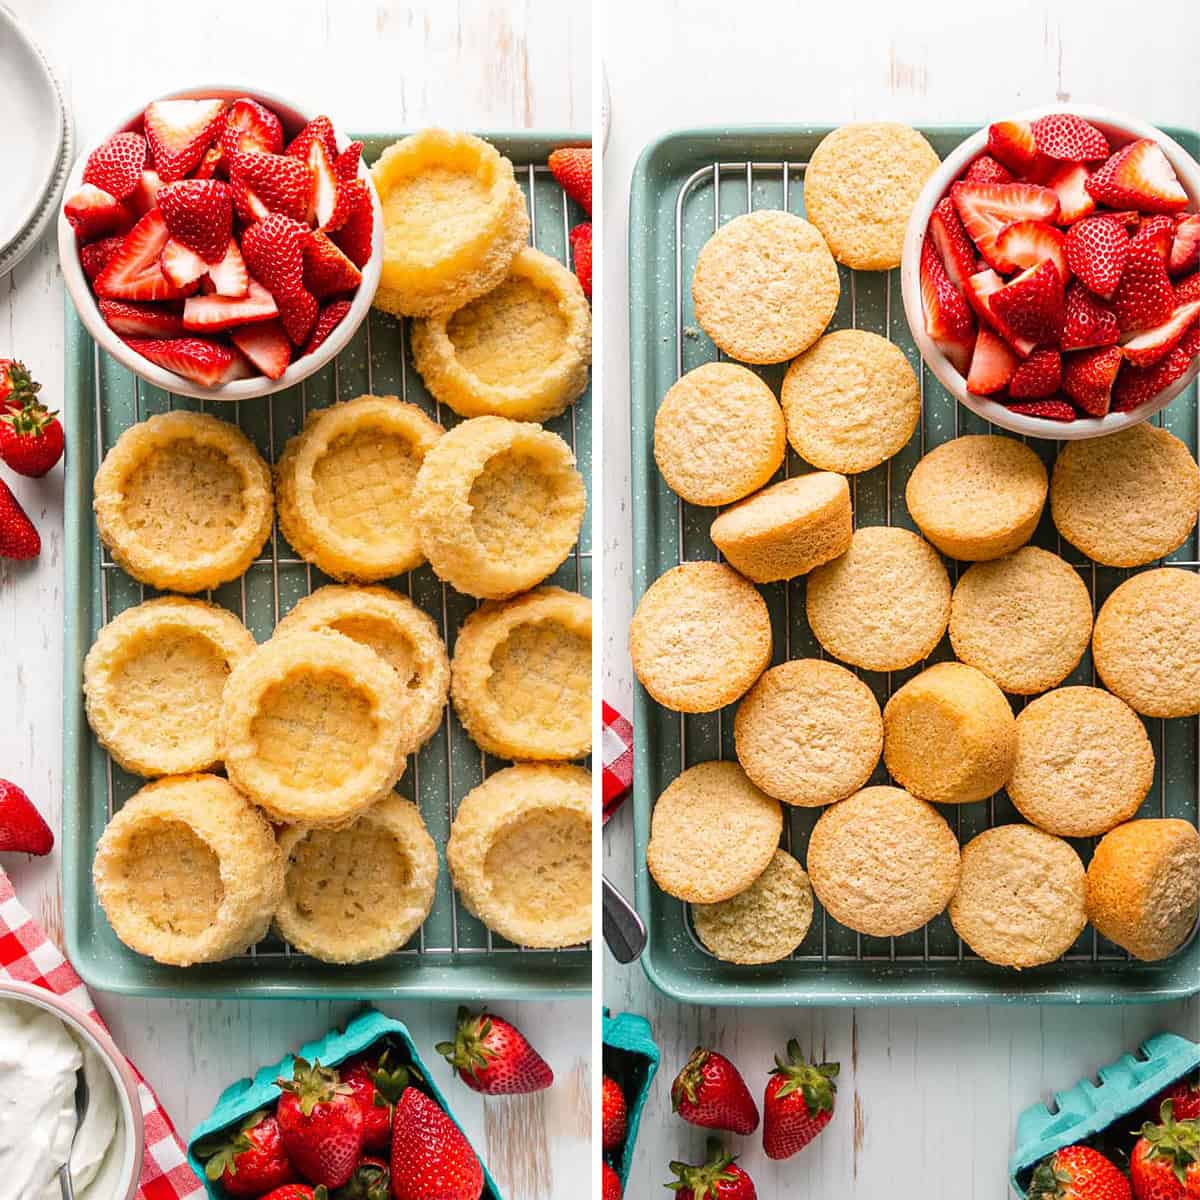 A green speckled pan filled with dessert shells and a pan filled with cupcakes next to bowls of strawberries.